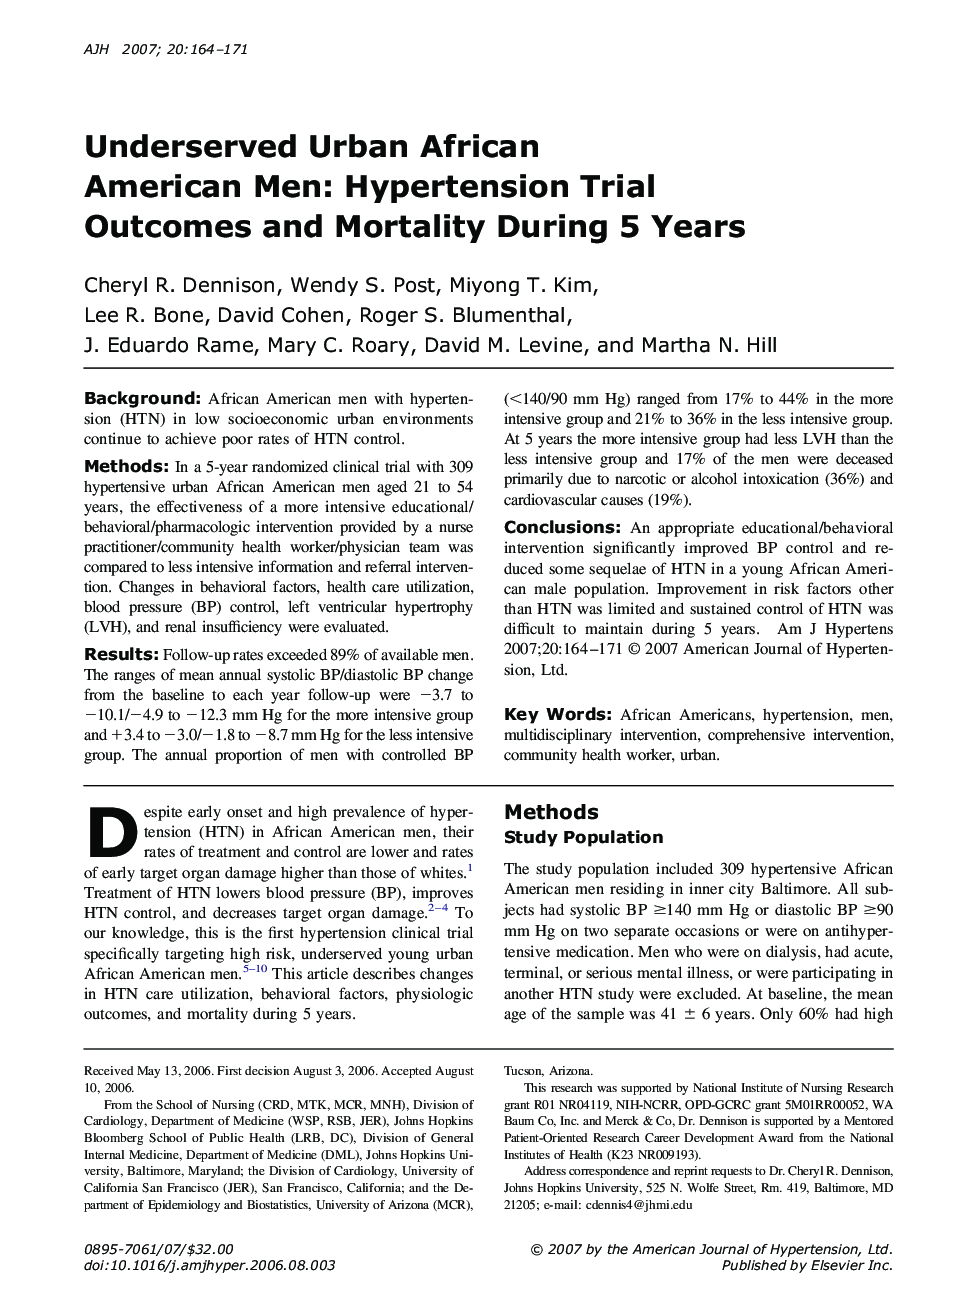 Underserved Urban African American Men: Hypertension Trial Outcomes and Mortality During 5 Years